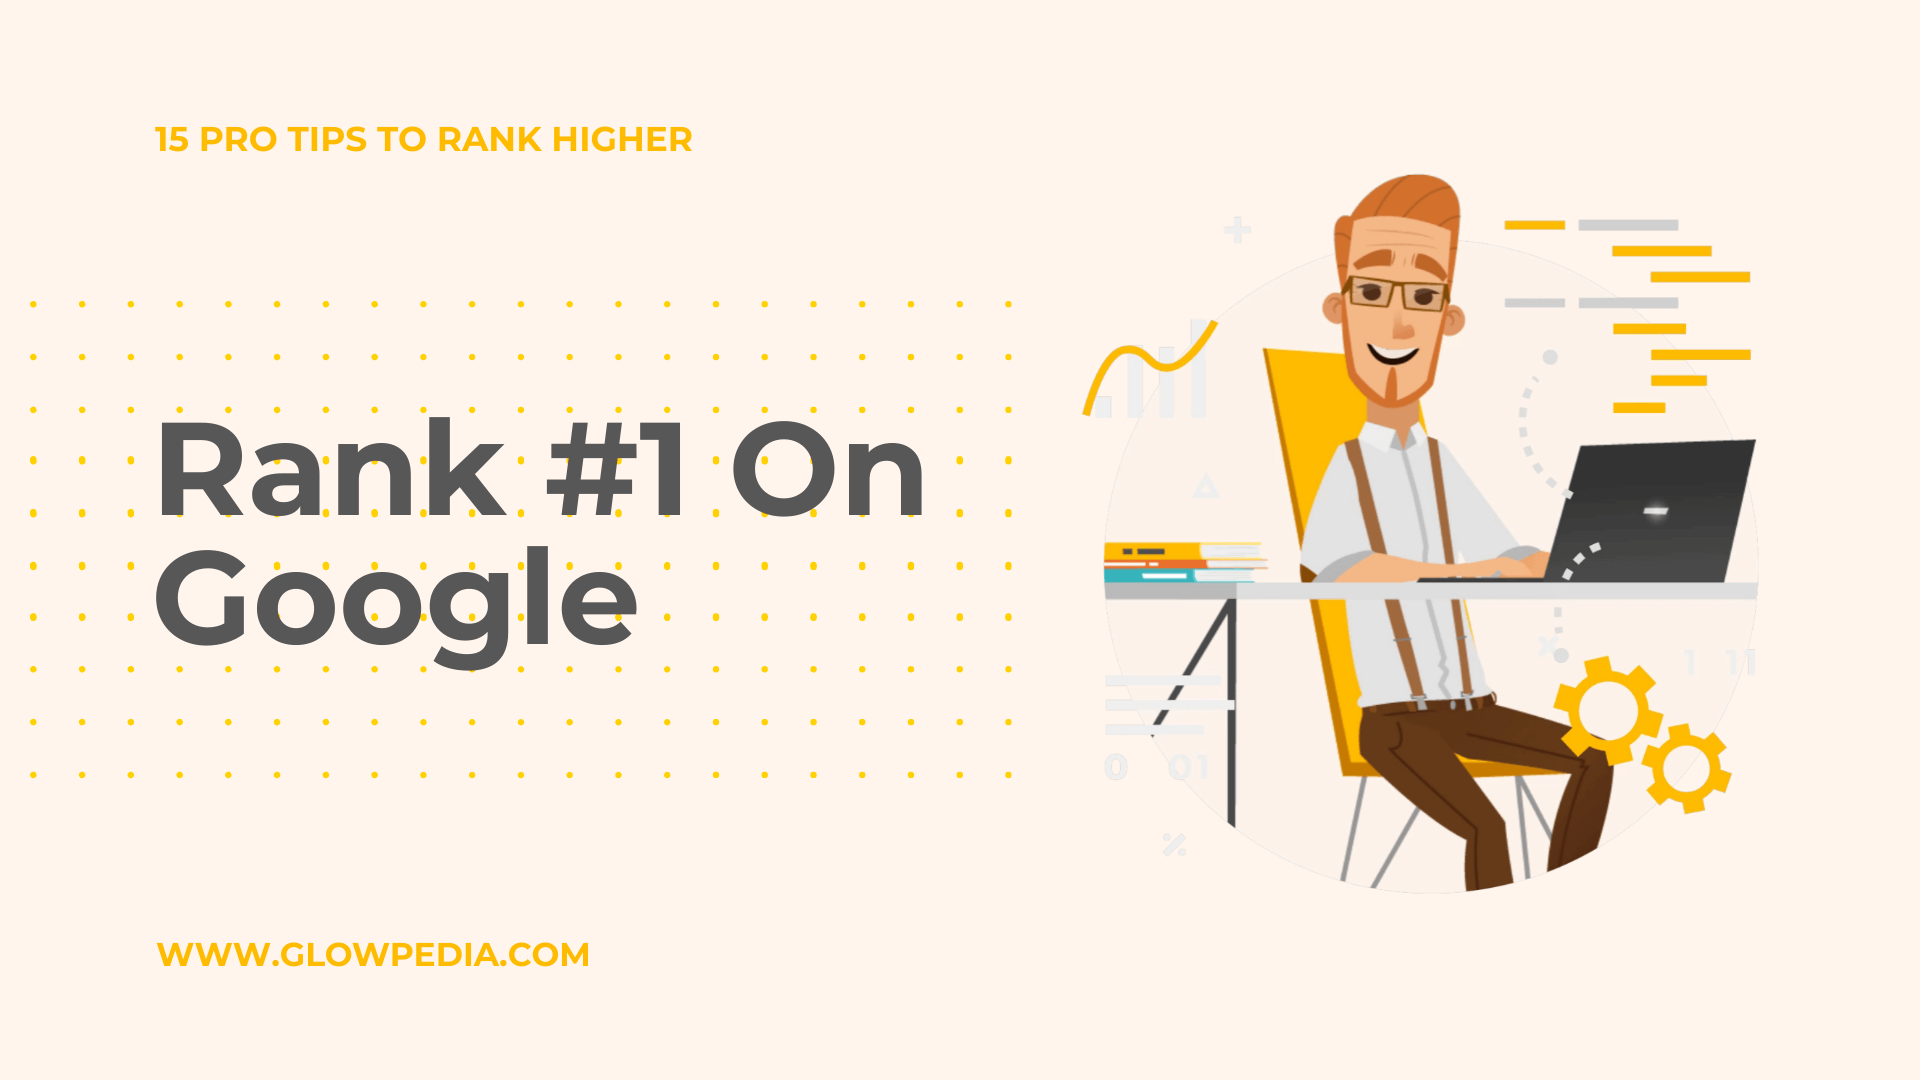 How to rank high on Google